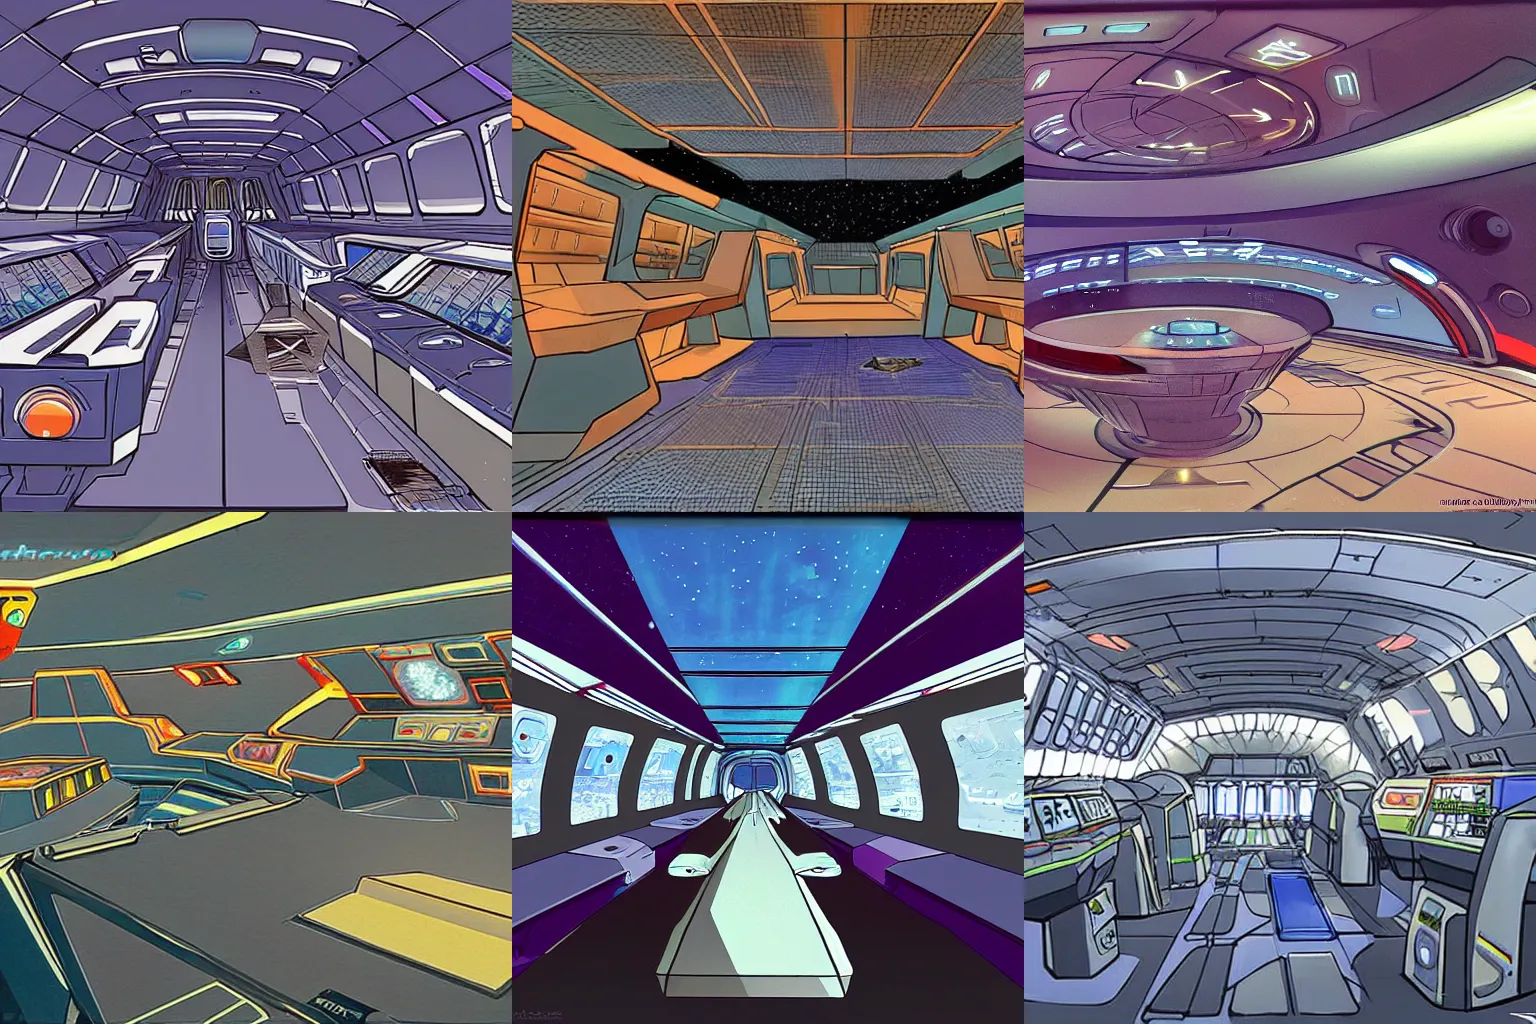 Prompt: Concept art of inside a large passenger spaceship, with a large open plaza with stores visible at the side, from a space themed Serria point and click 2D graphic adventure game, made in 1999